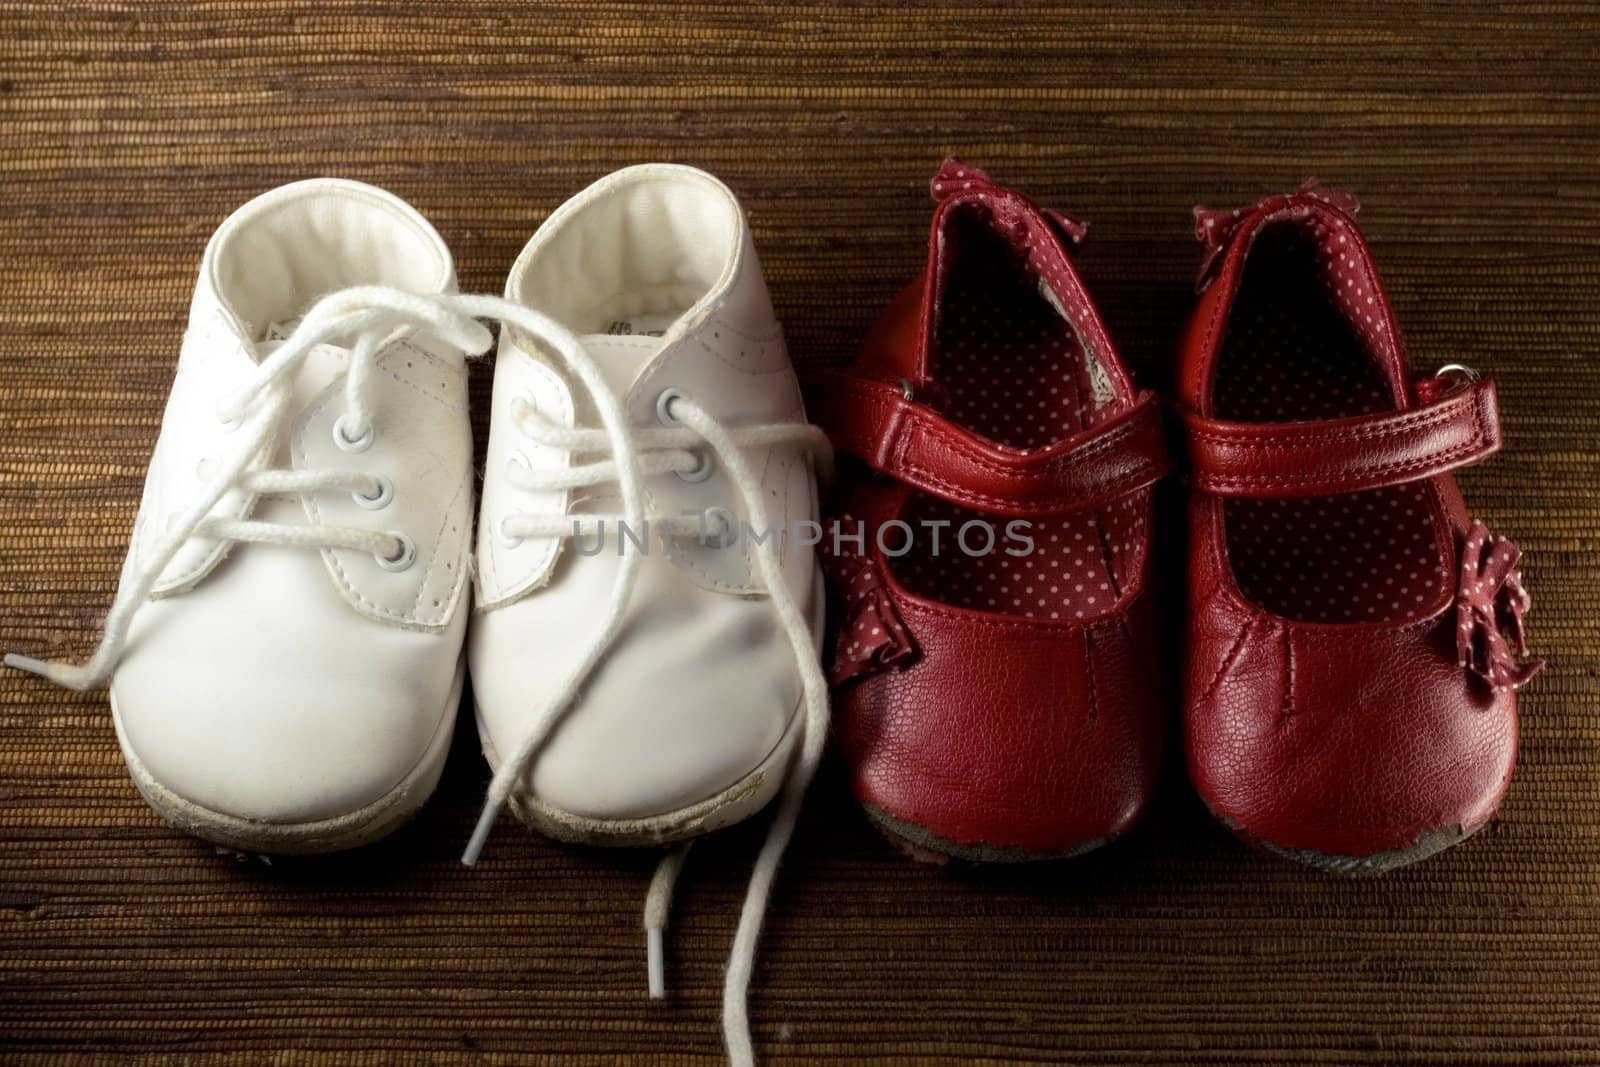 two pairs of worn baby shoes